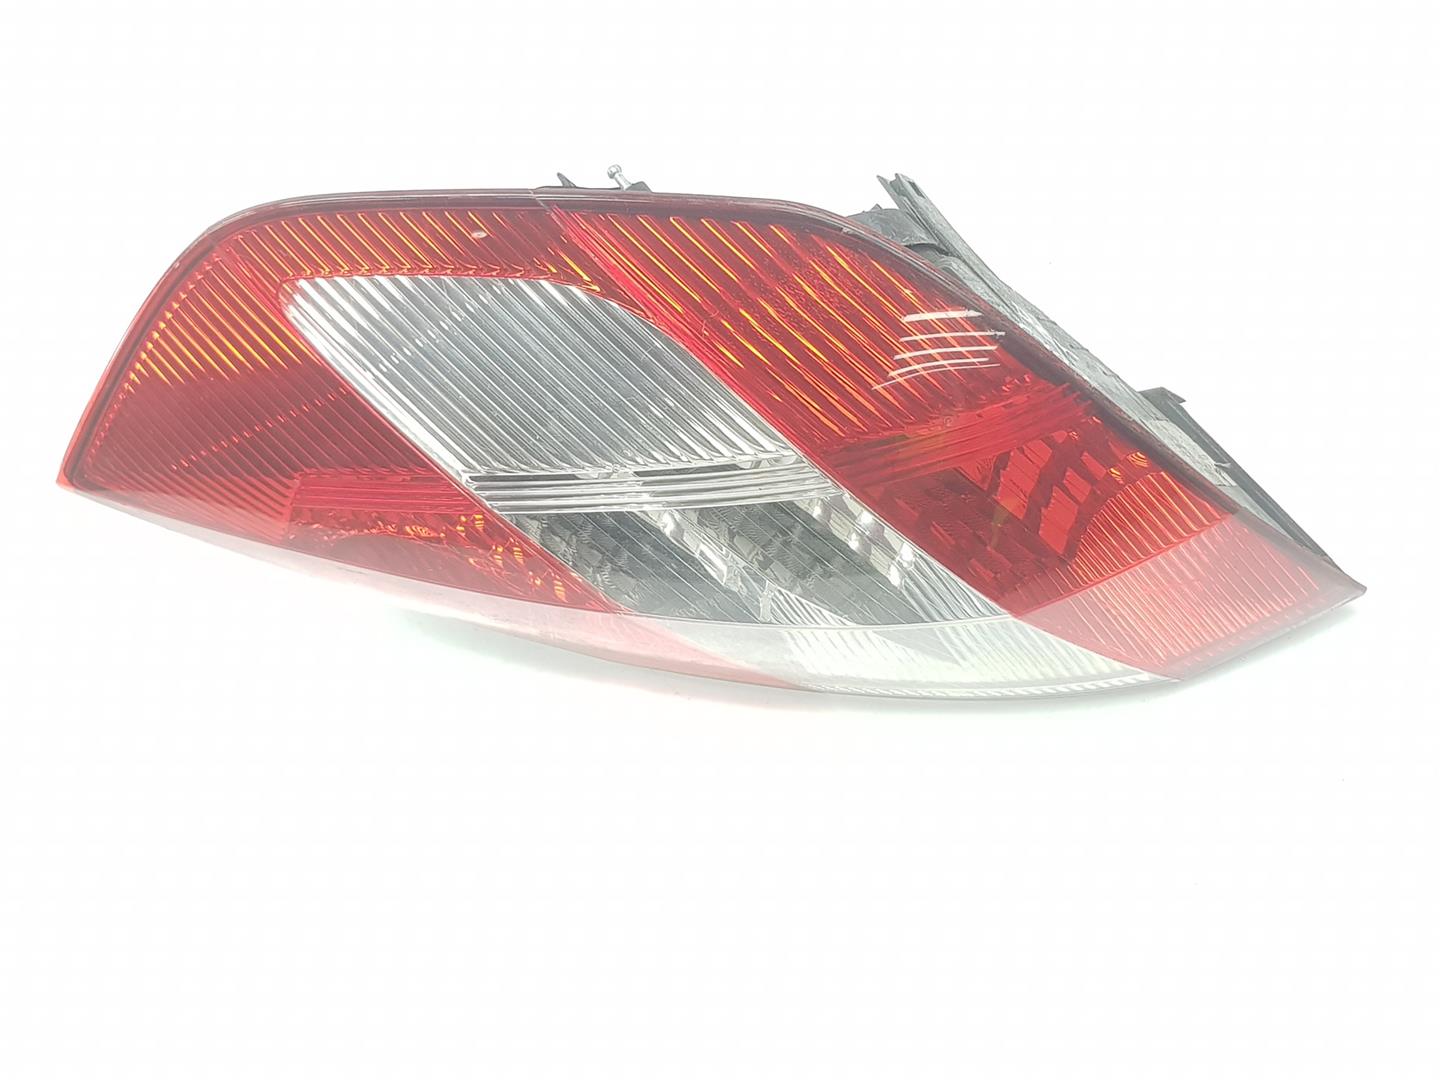 RENAULT Scenic 2 generation (2003-2010) Rear Right Taillight Lamp 8200493375, 8200493375 24206871